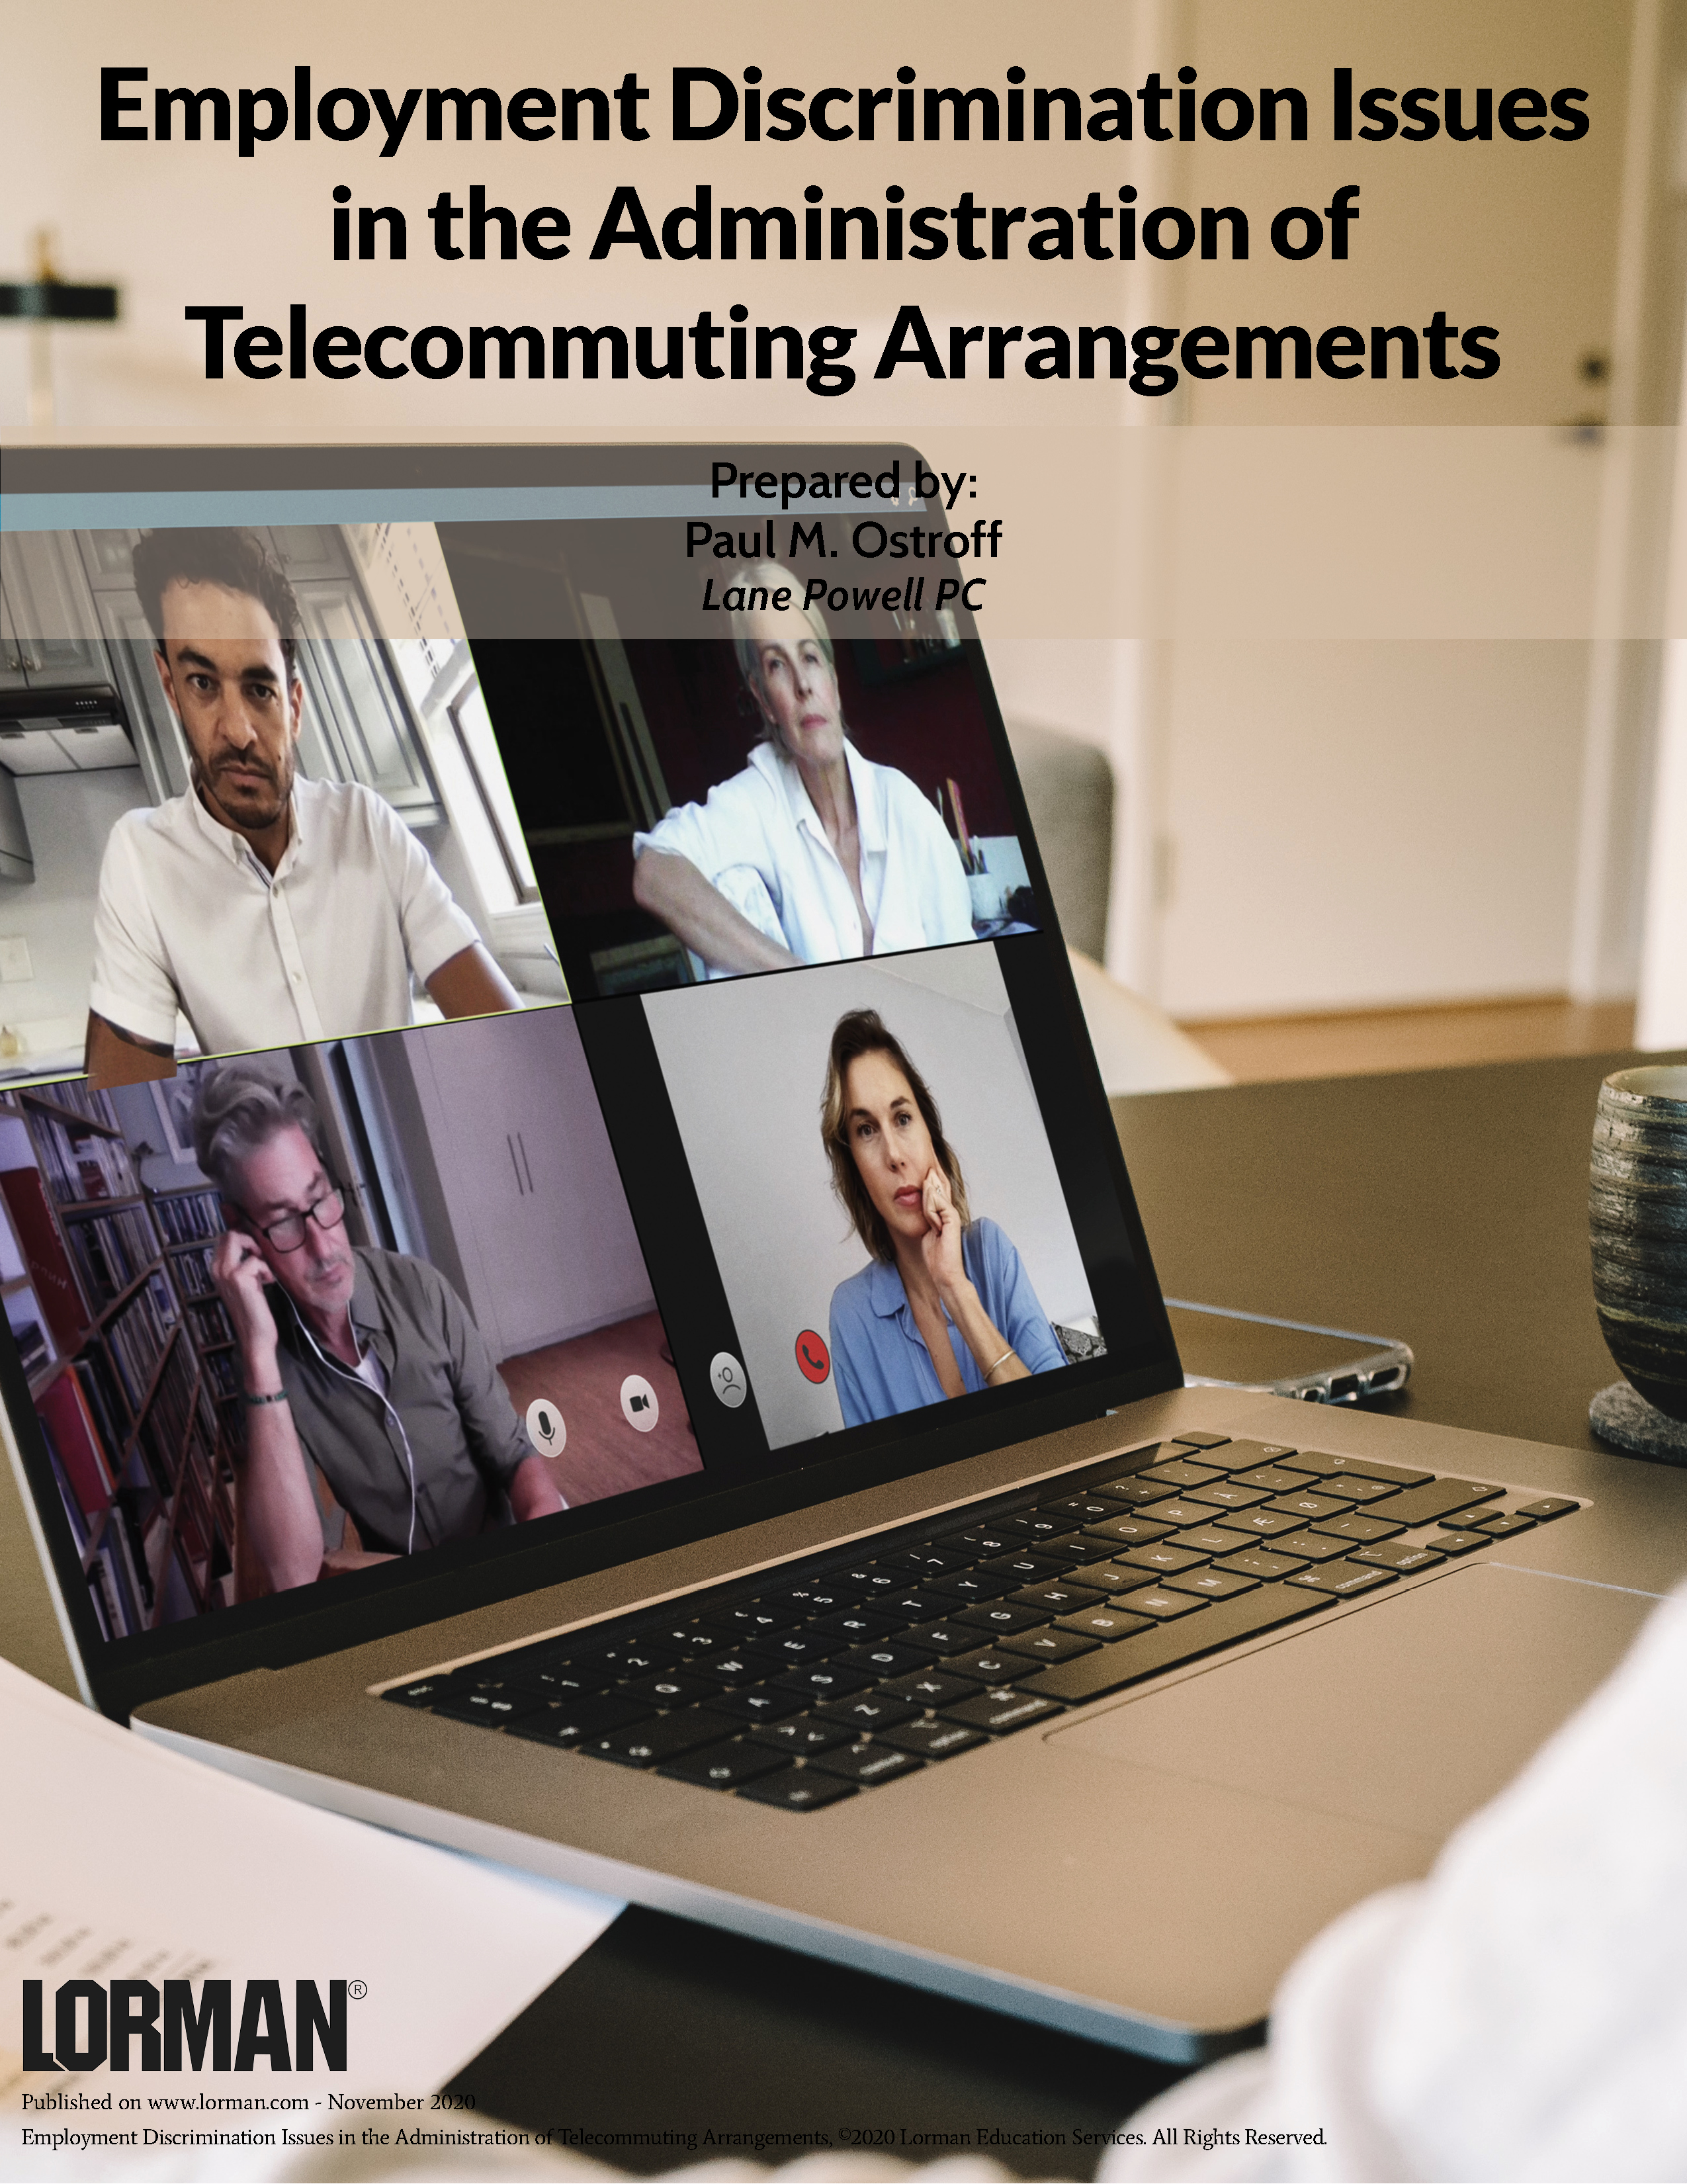 Employment Discrimination Issues in the Administration of Telecommuting Arrangements